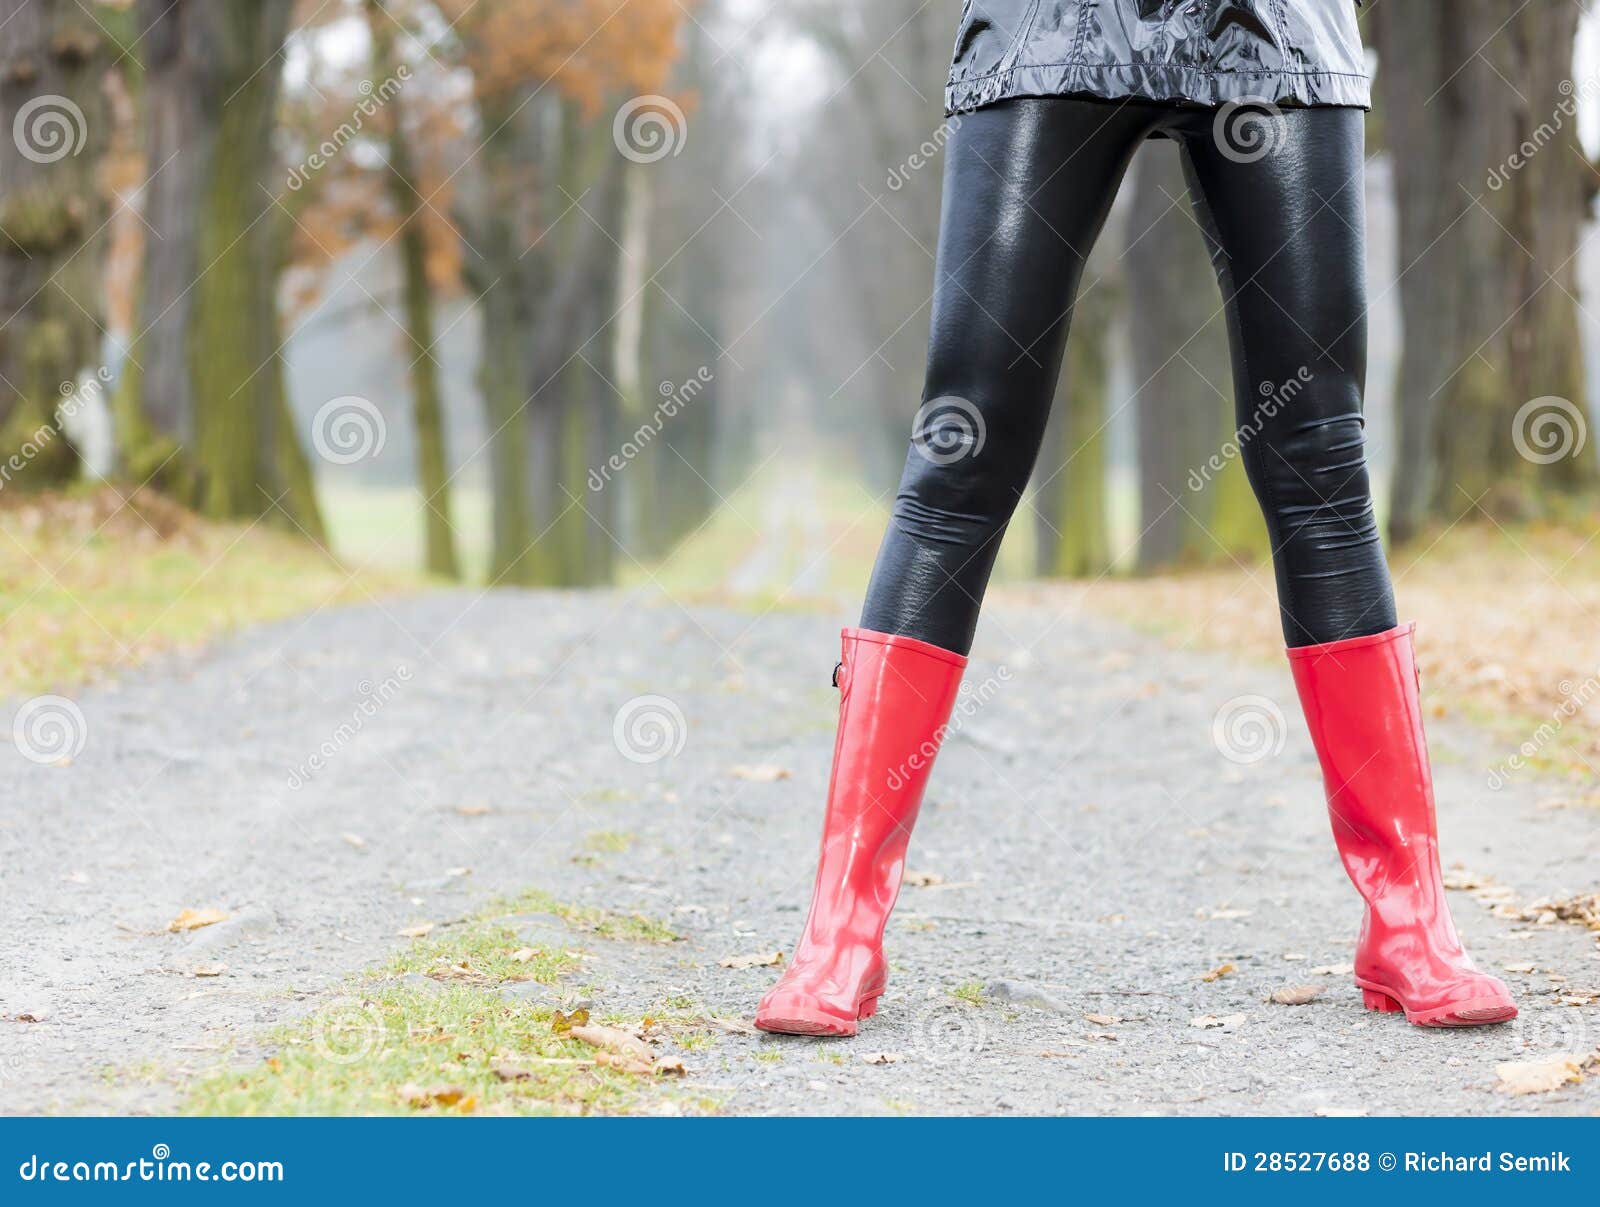 Woman Wearing Red Rubber Boots Stock Photo - Image of style, black ...